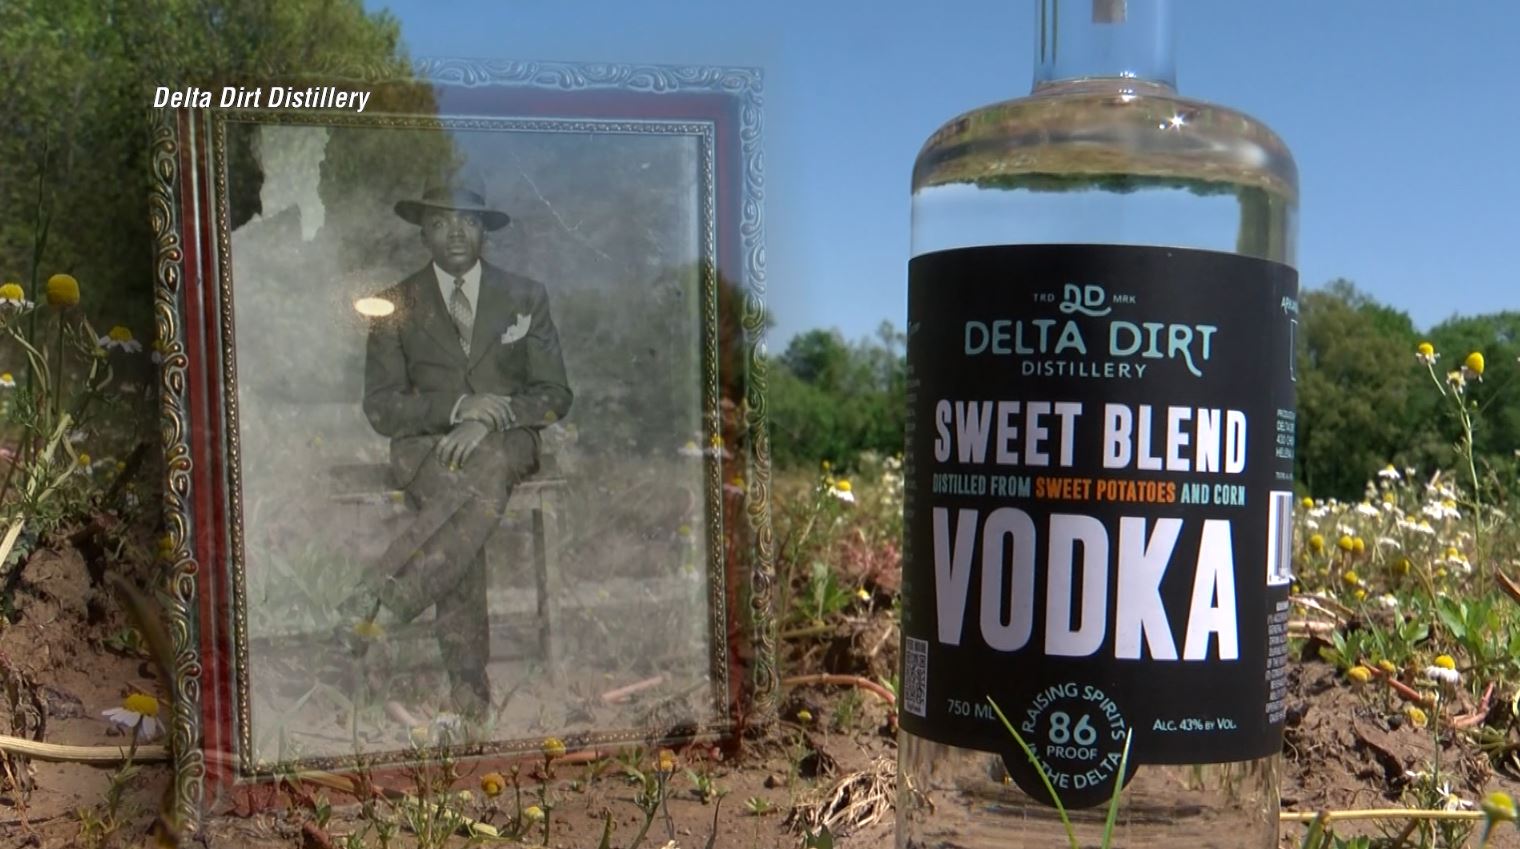 5 Star Stories: The legacy of Distillery Delta Dirt